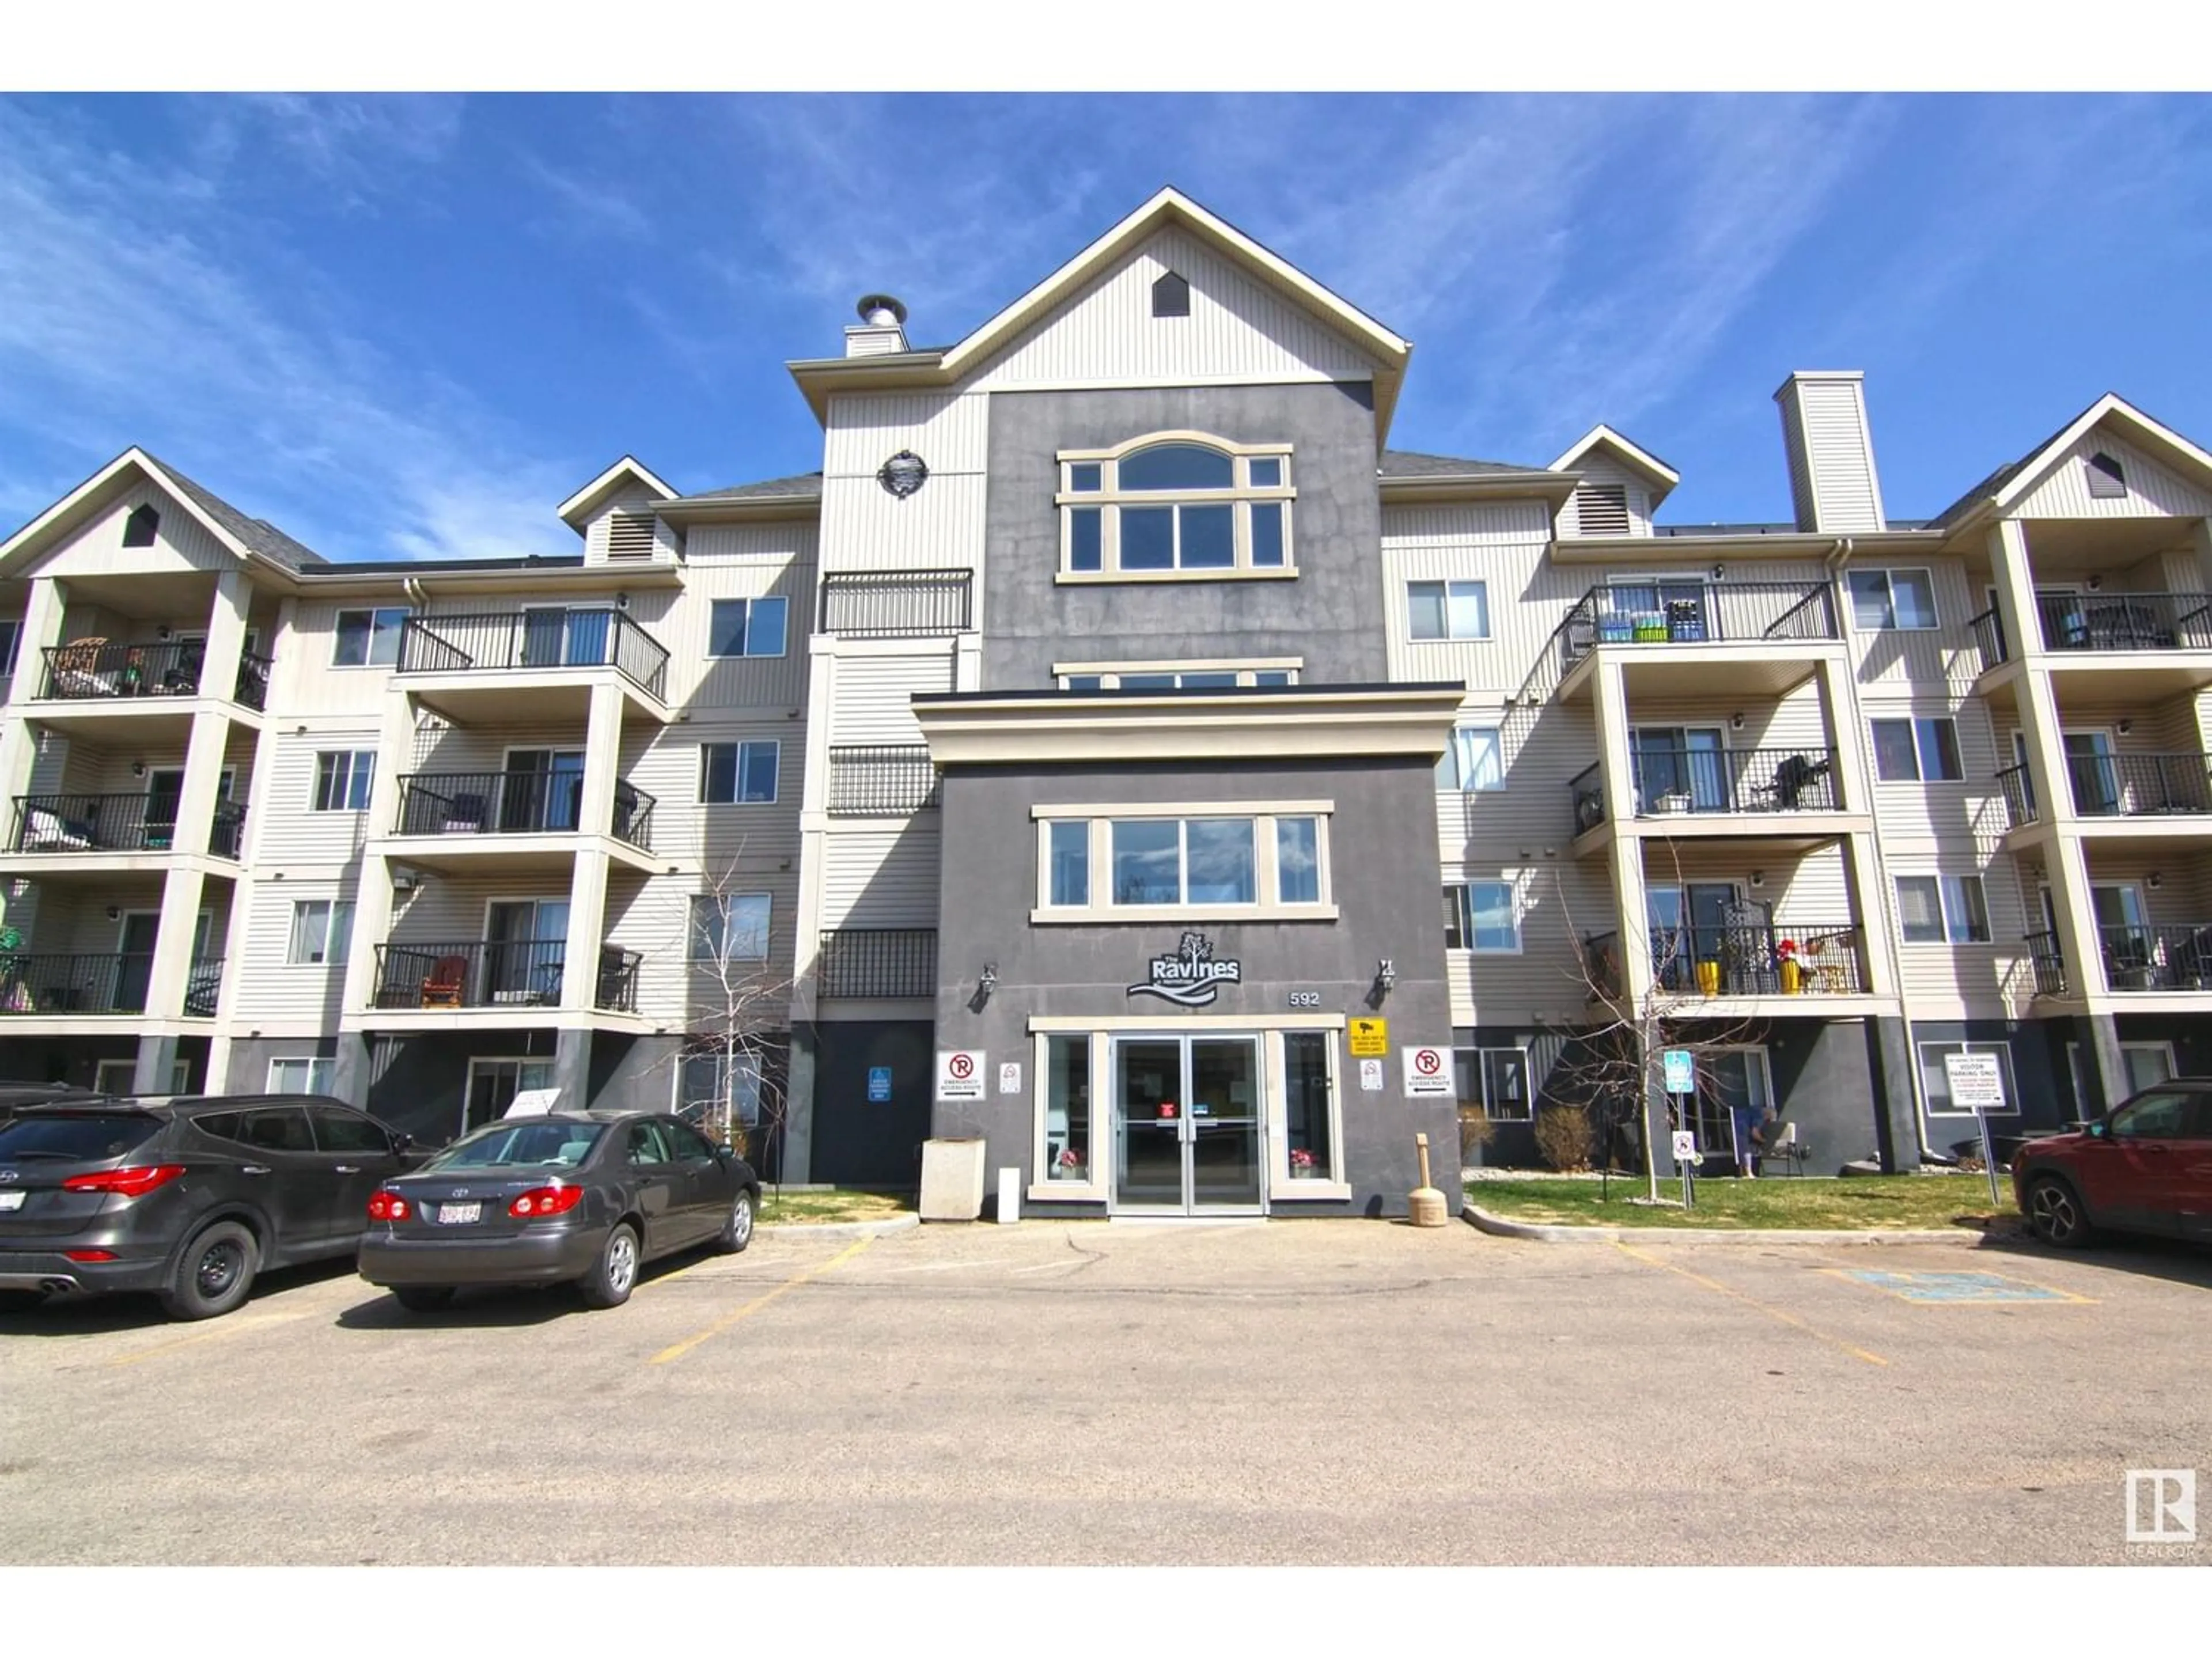 A pic from exterior of the house or condo for #328 592 HOOKE RD NW, Edmonton Alberta T5A5H2